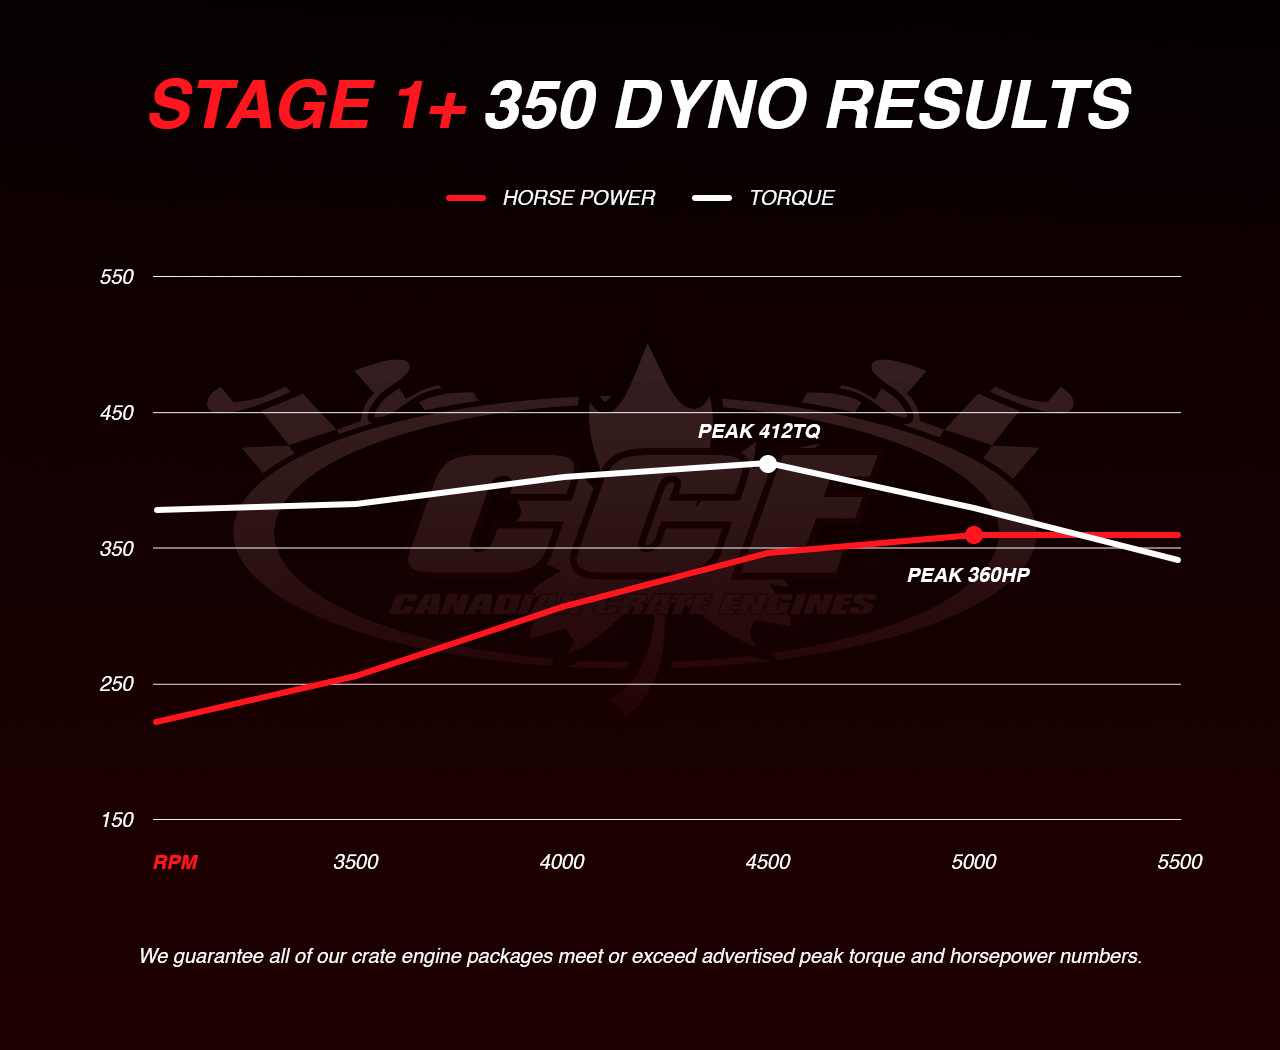 Dyno Graph Results for Chevy Stage 1+ showing peak torque of 412TQ and peak horsepower of 360HP